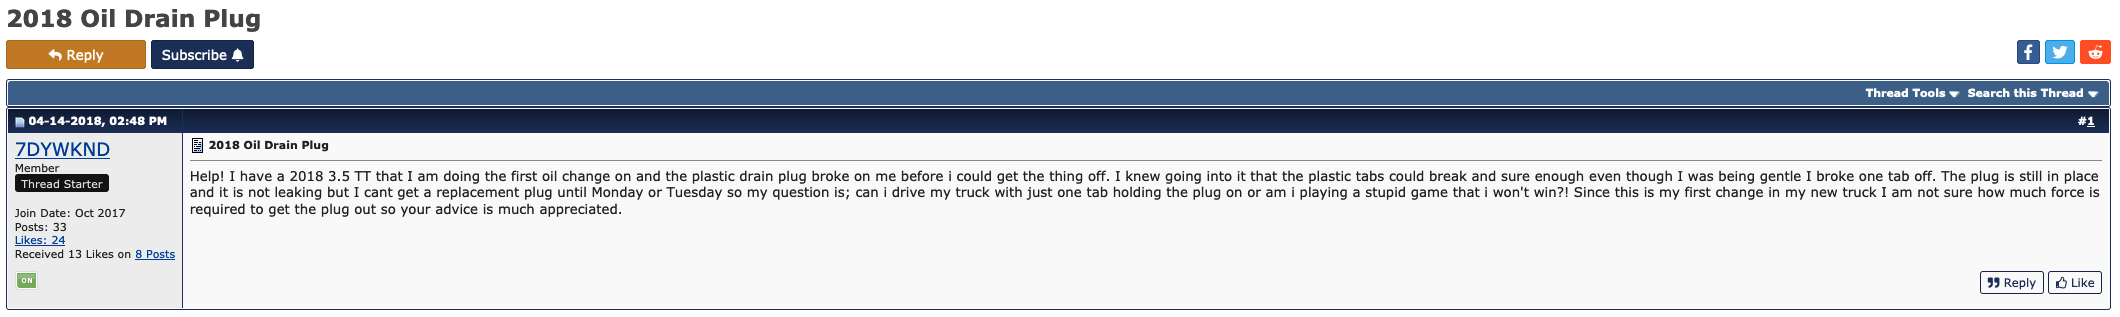 screenshot shows message board user asking for help after breaking the tabs off his plastic oil pan drain plug